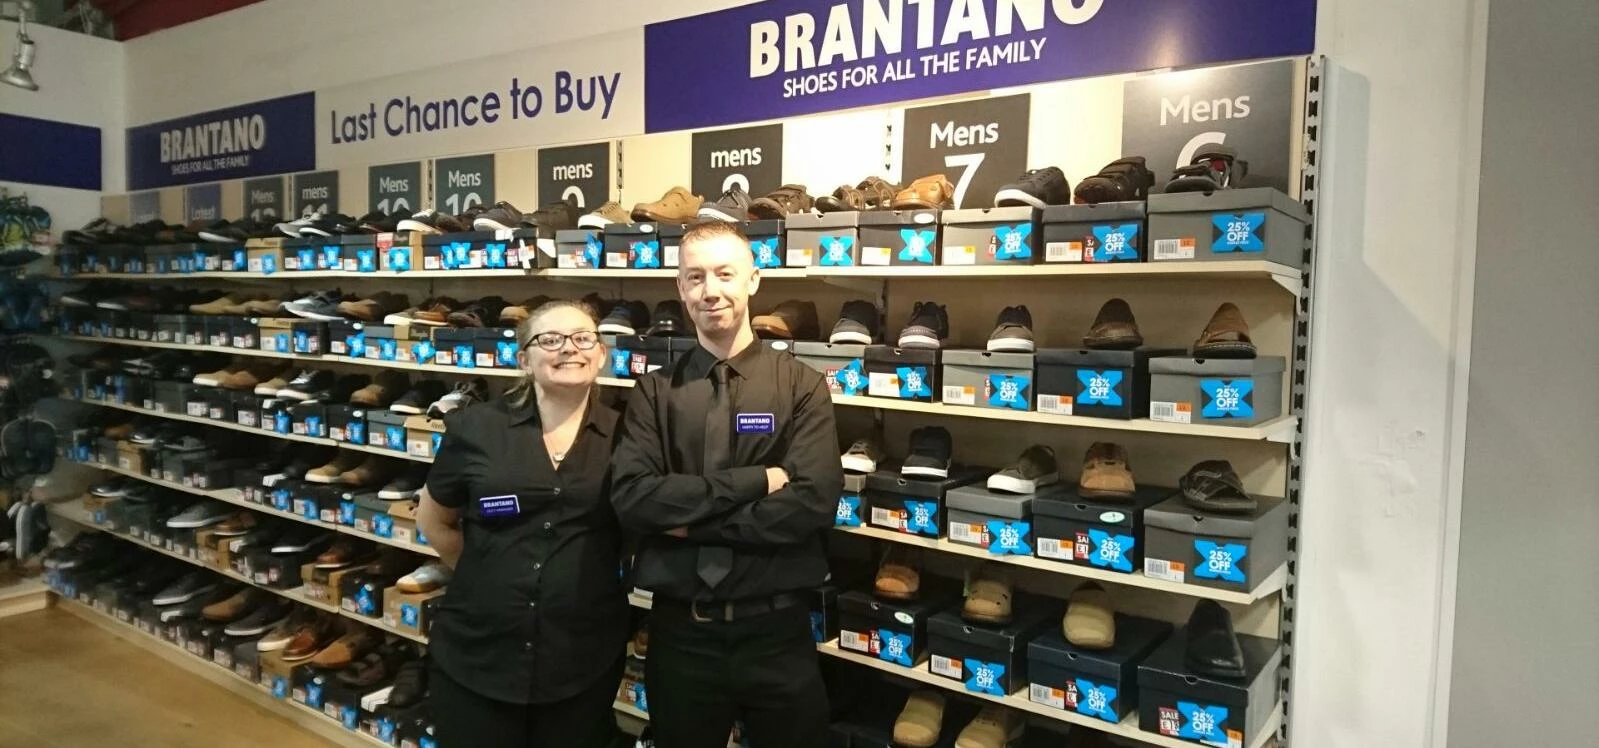 left to right) Store manager, Nikki Broderick with sales assistant, Carl Lake 